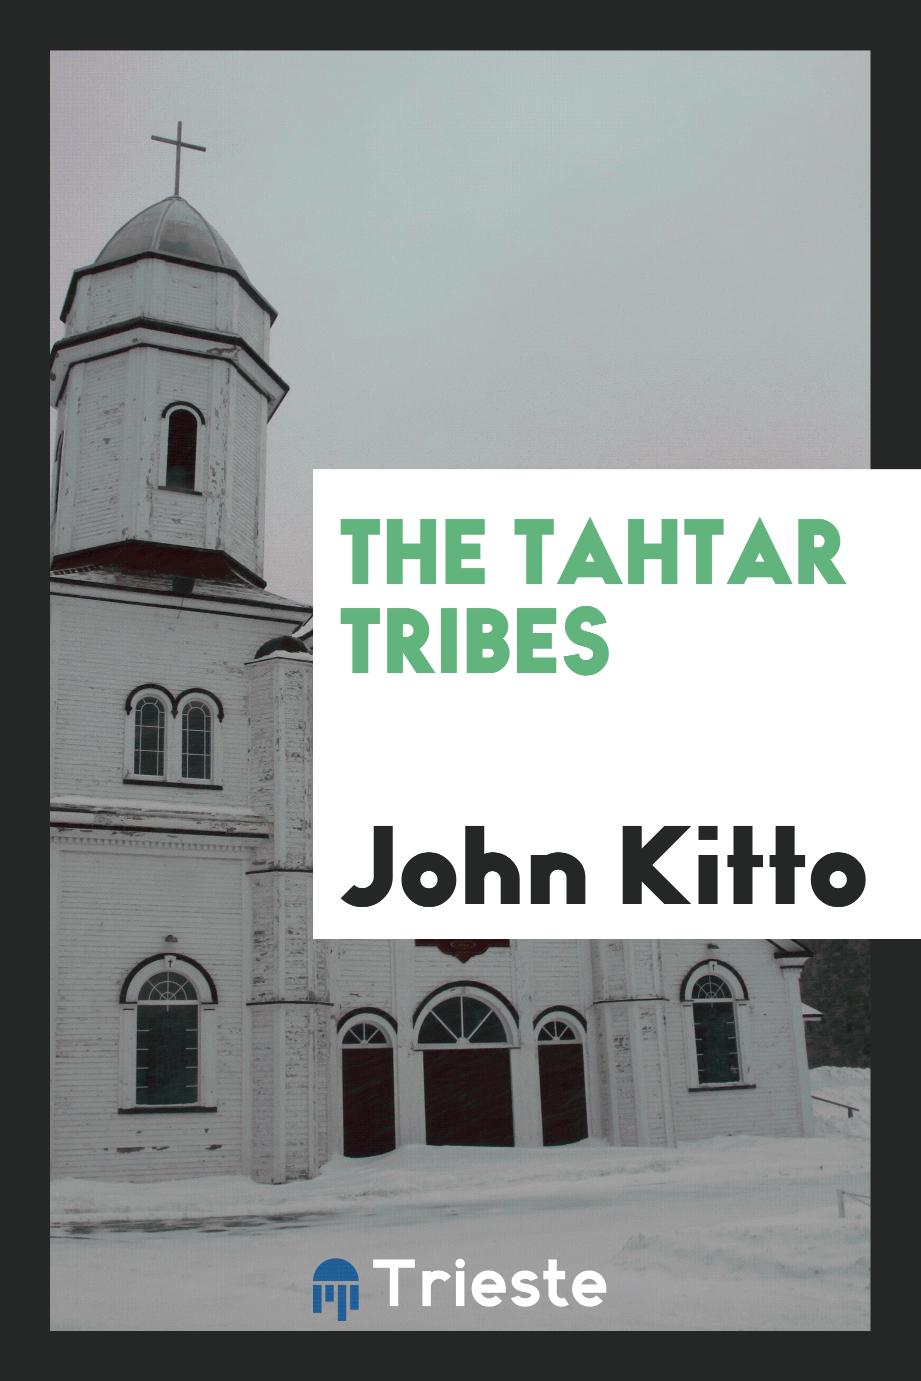 The Tahtar tribes